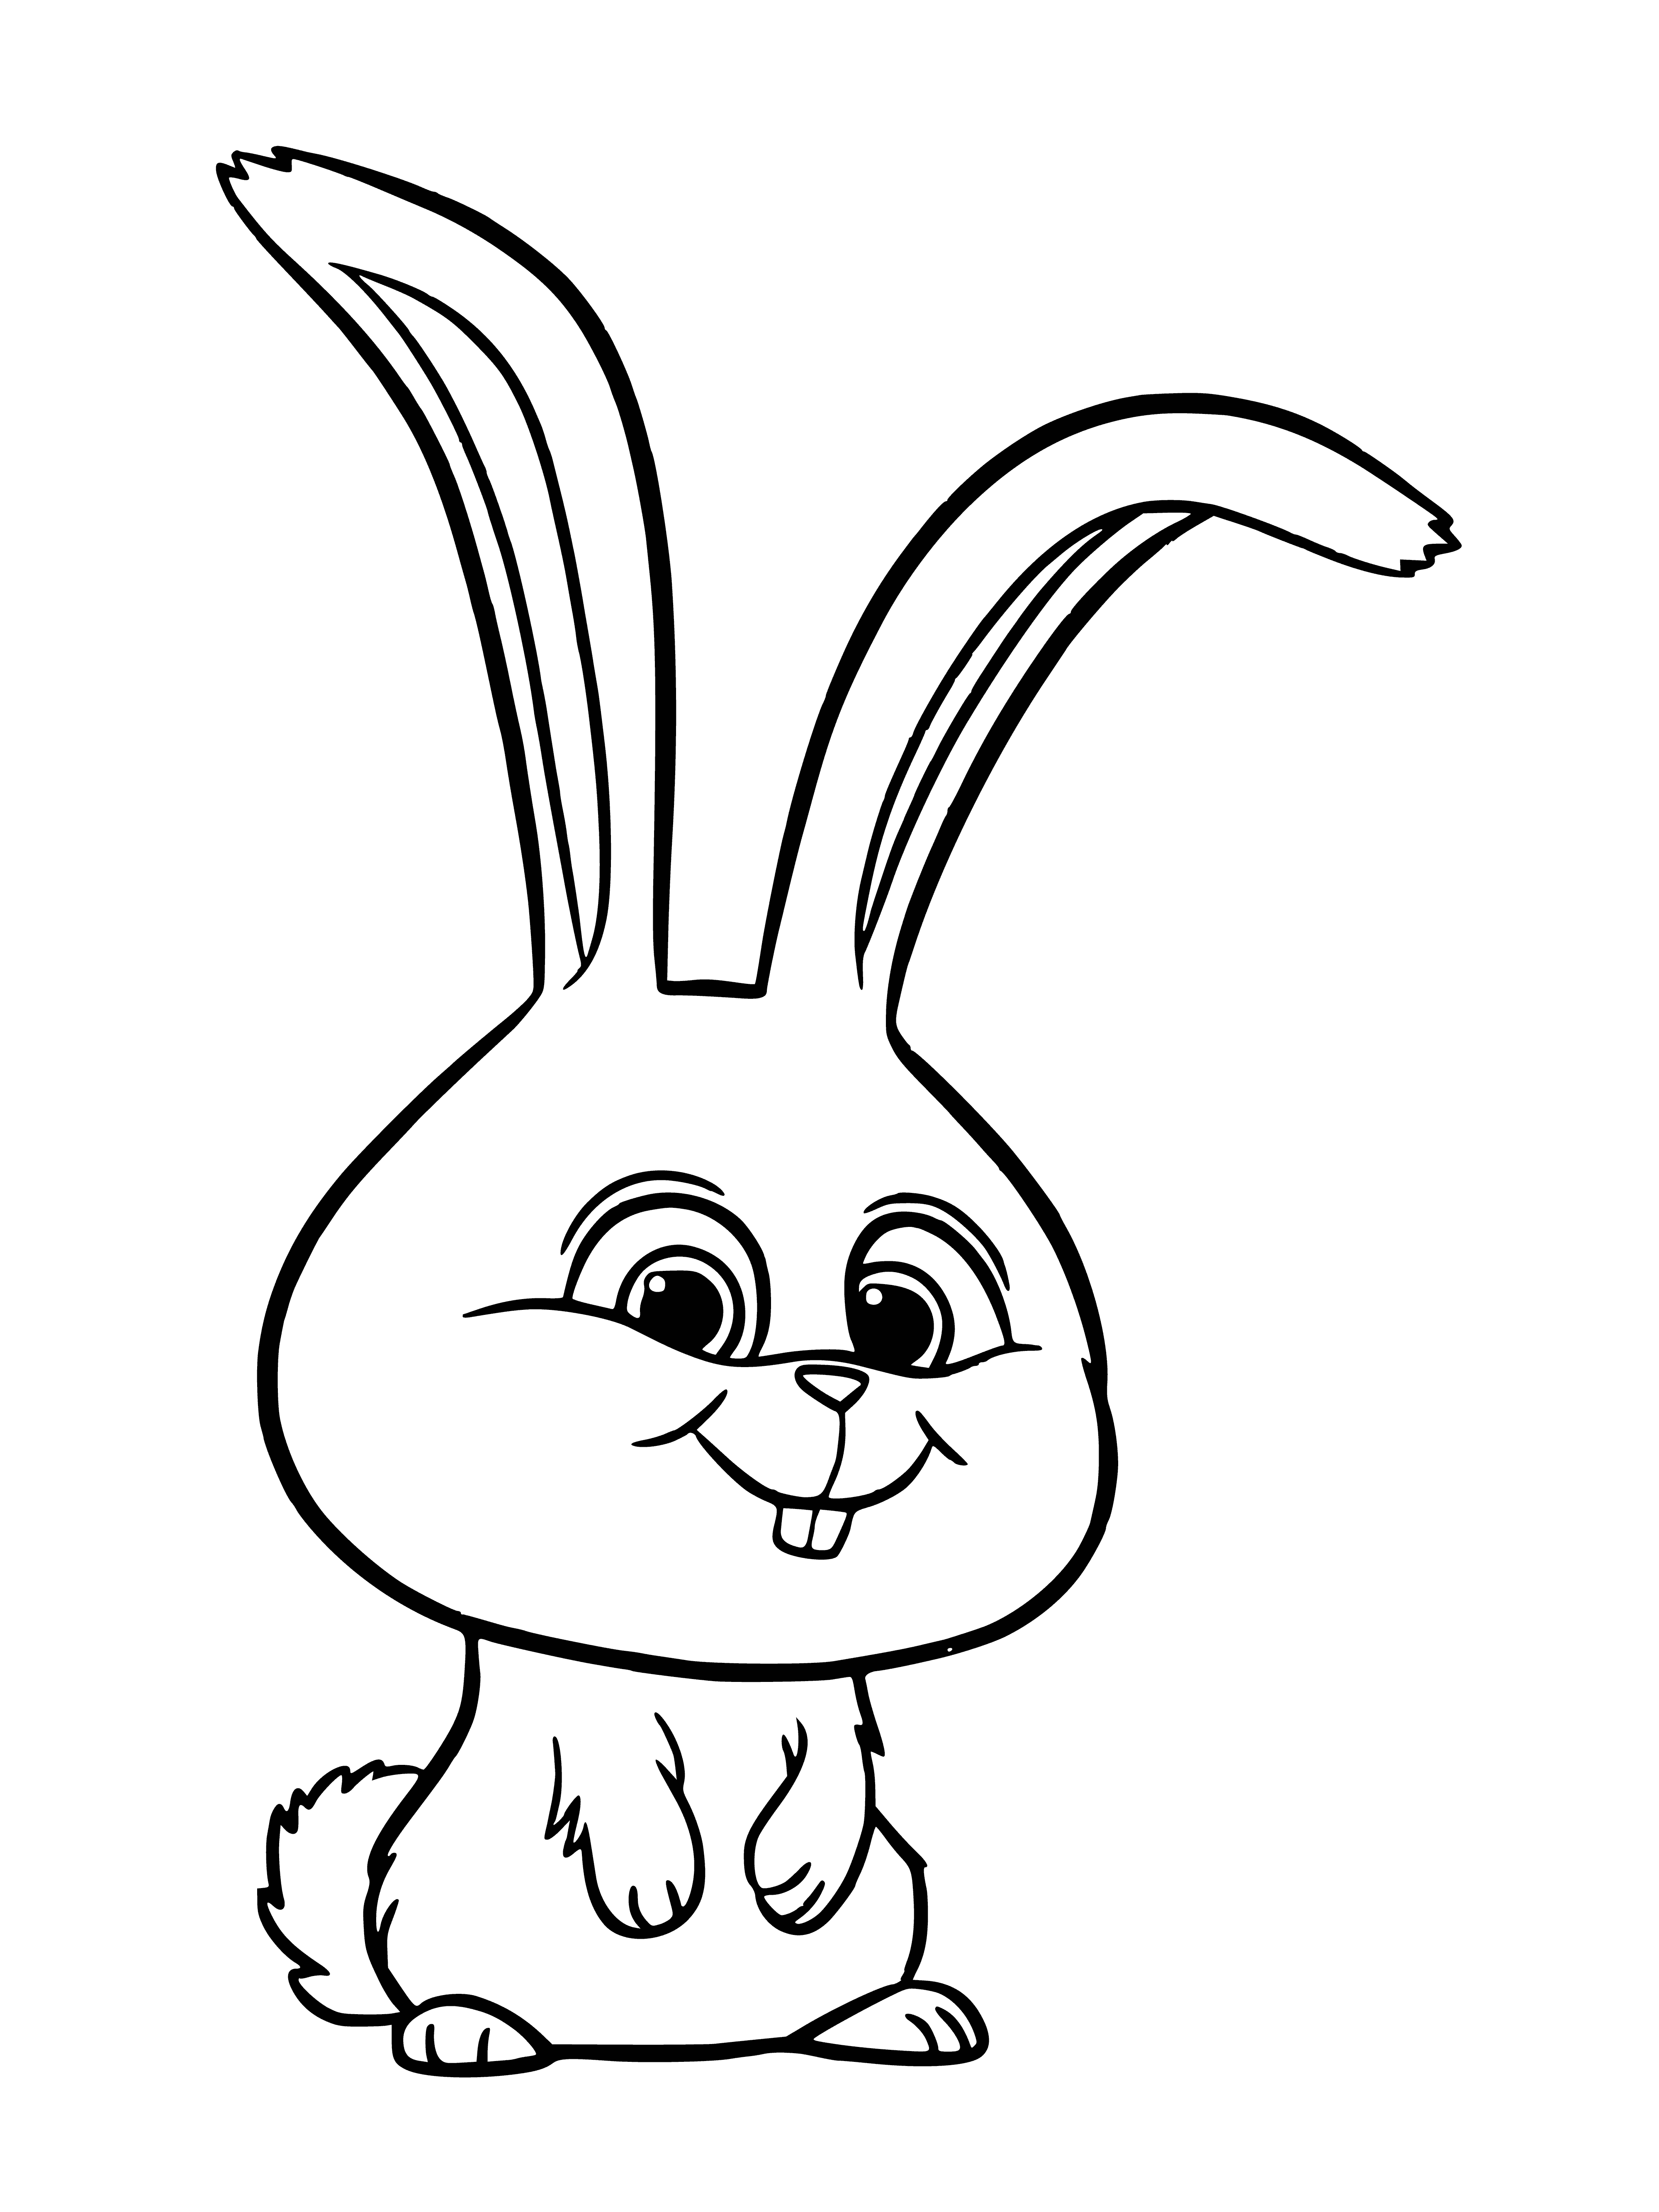 coloring page: A white rabbit with black spots looks up in surprise in the snowy sky.